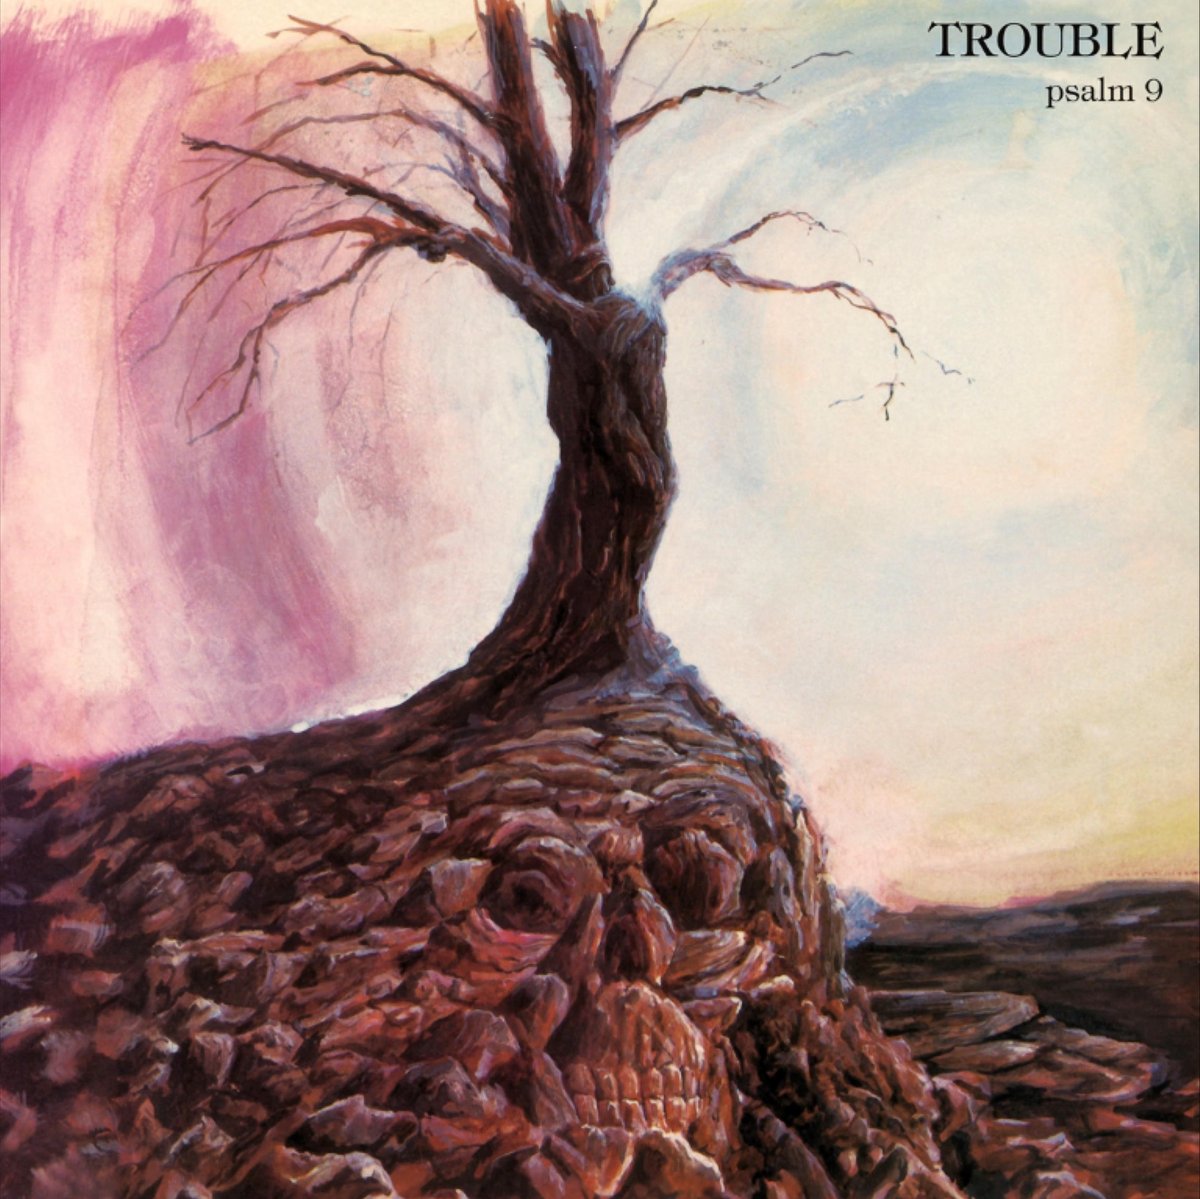 On March 10, 1984, Psalm 9, the debut album of the American doom metal band TROUBLE, was released via Metal Blade.

@troublemetal @MetalBlade #TroubleBand #TroubleMetal #doomMetal #metal #album #heavyMetal #RockMusic #Psalm9 #music #MetalMusic